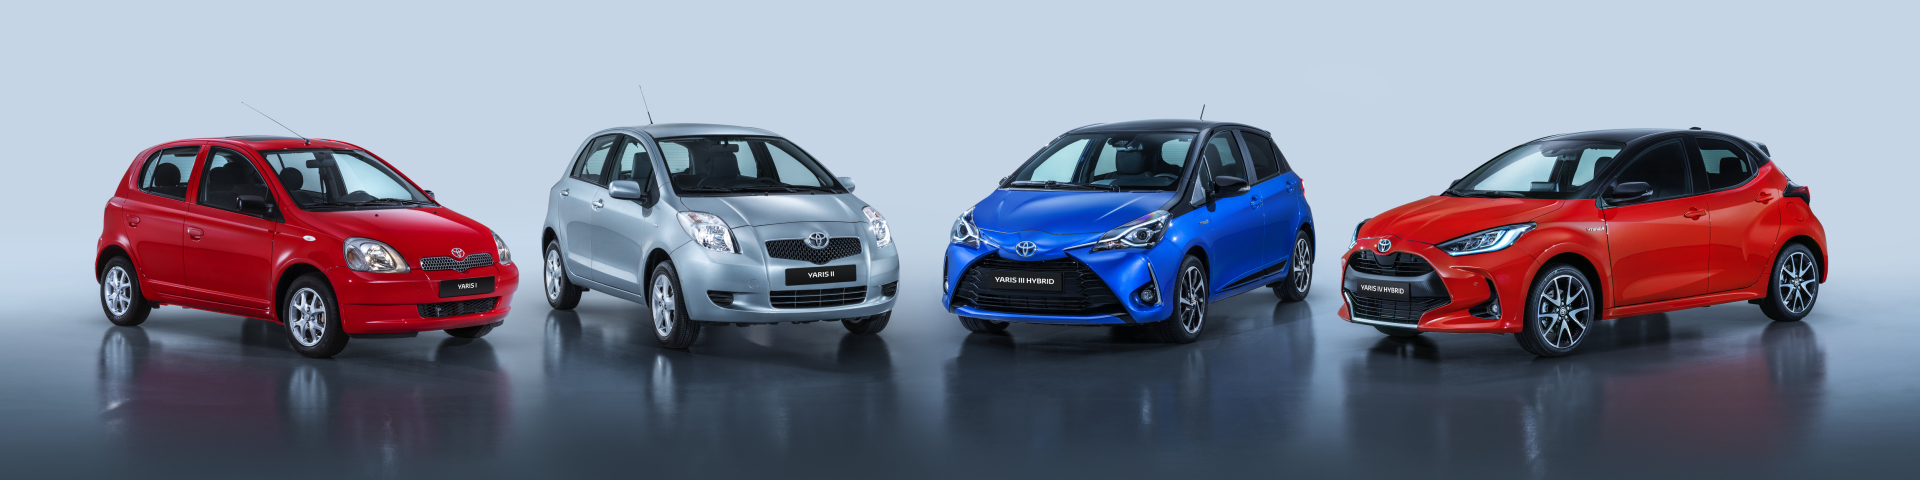 The four generations of Yaris produced in Hauts-de-France